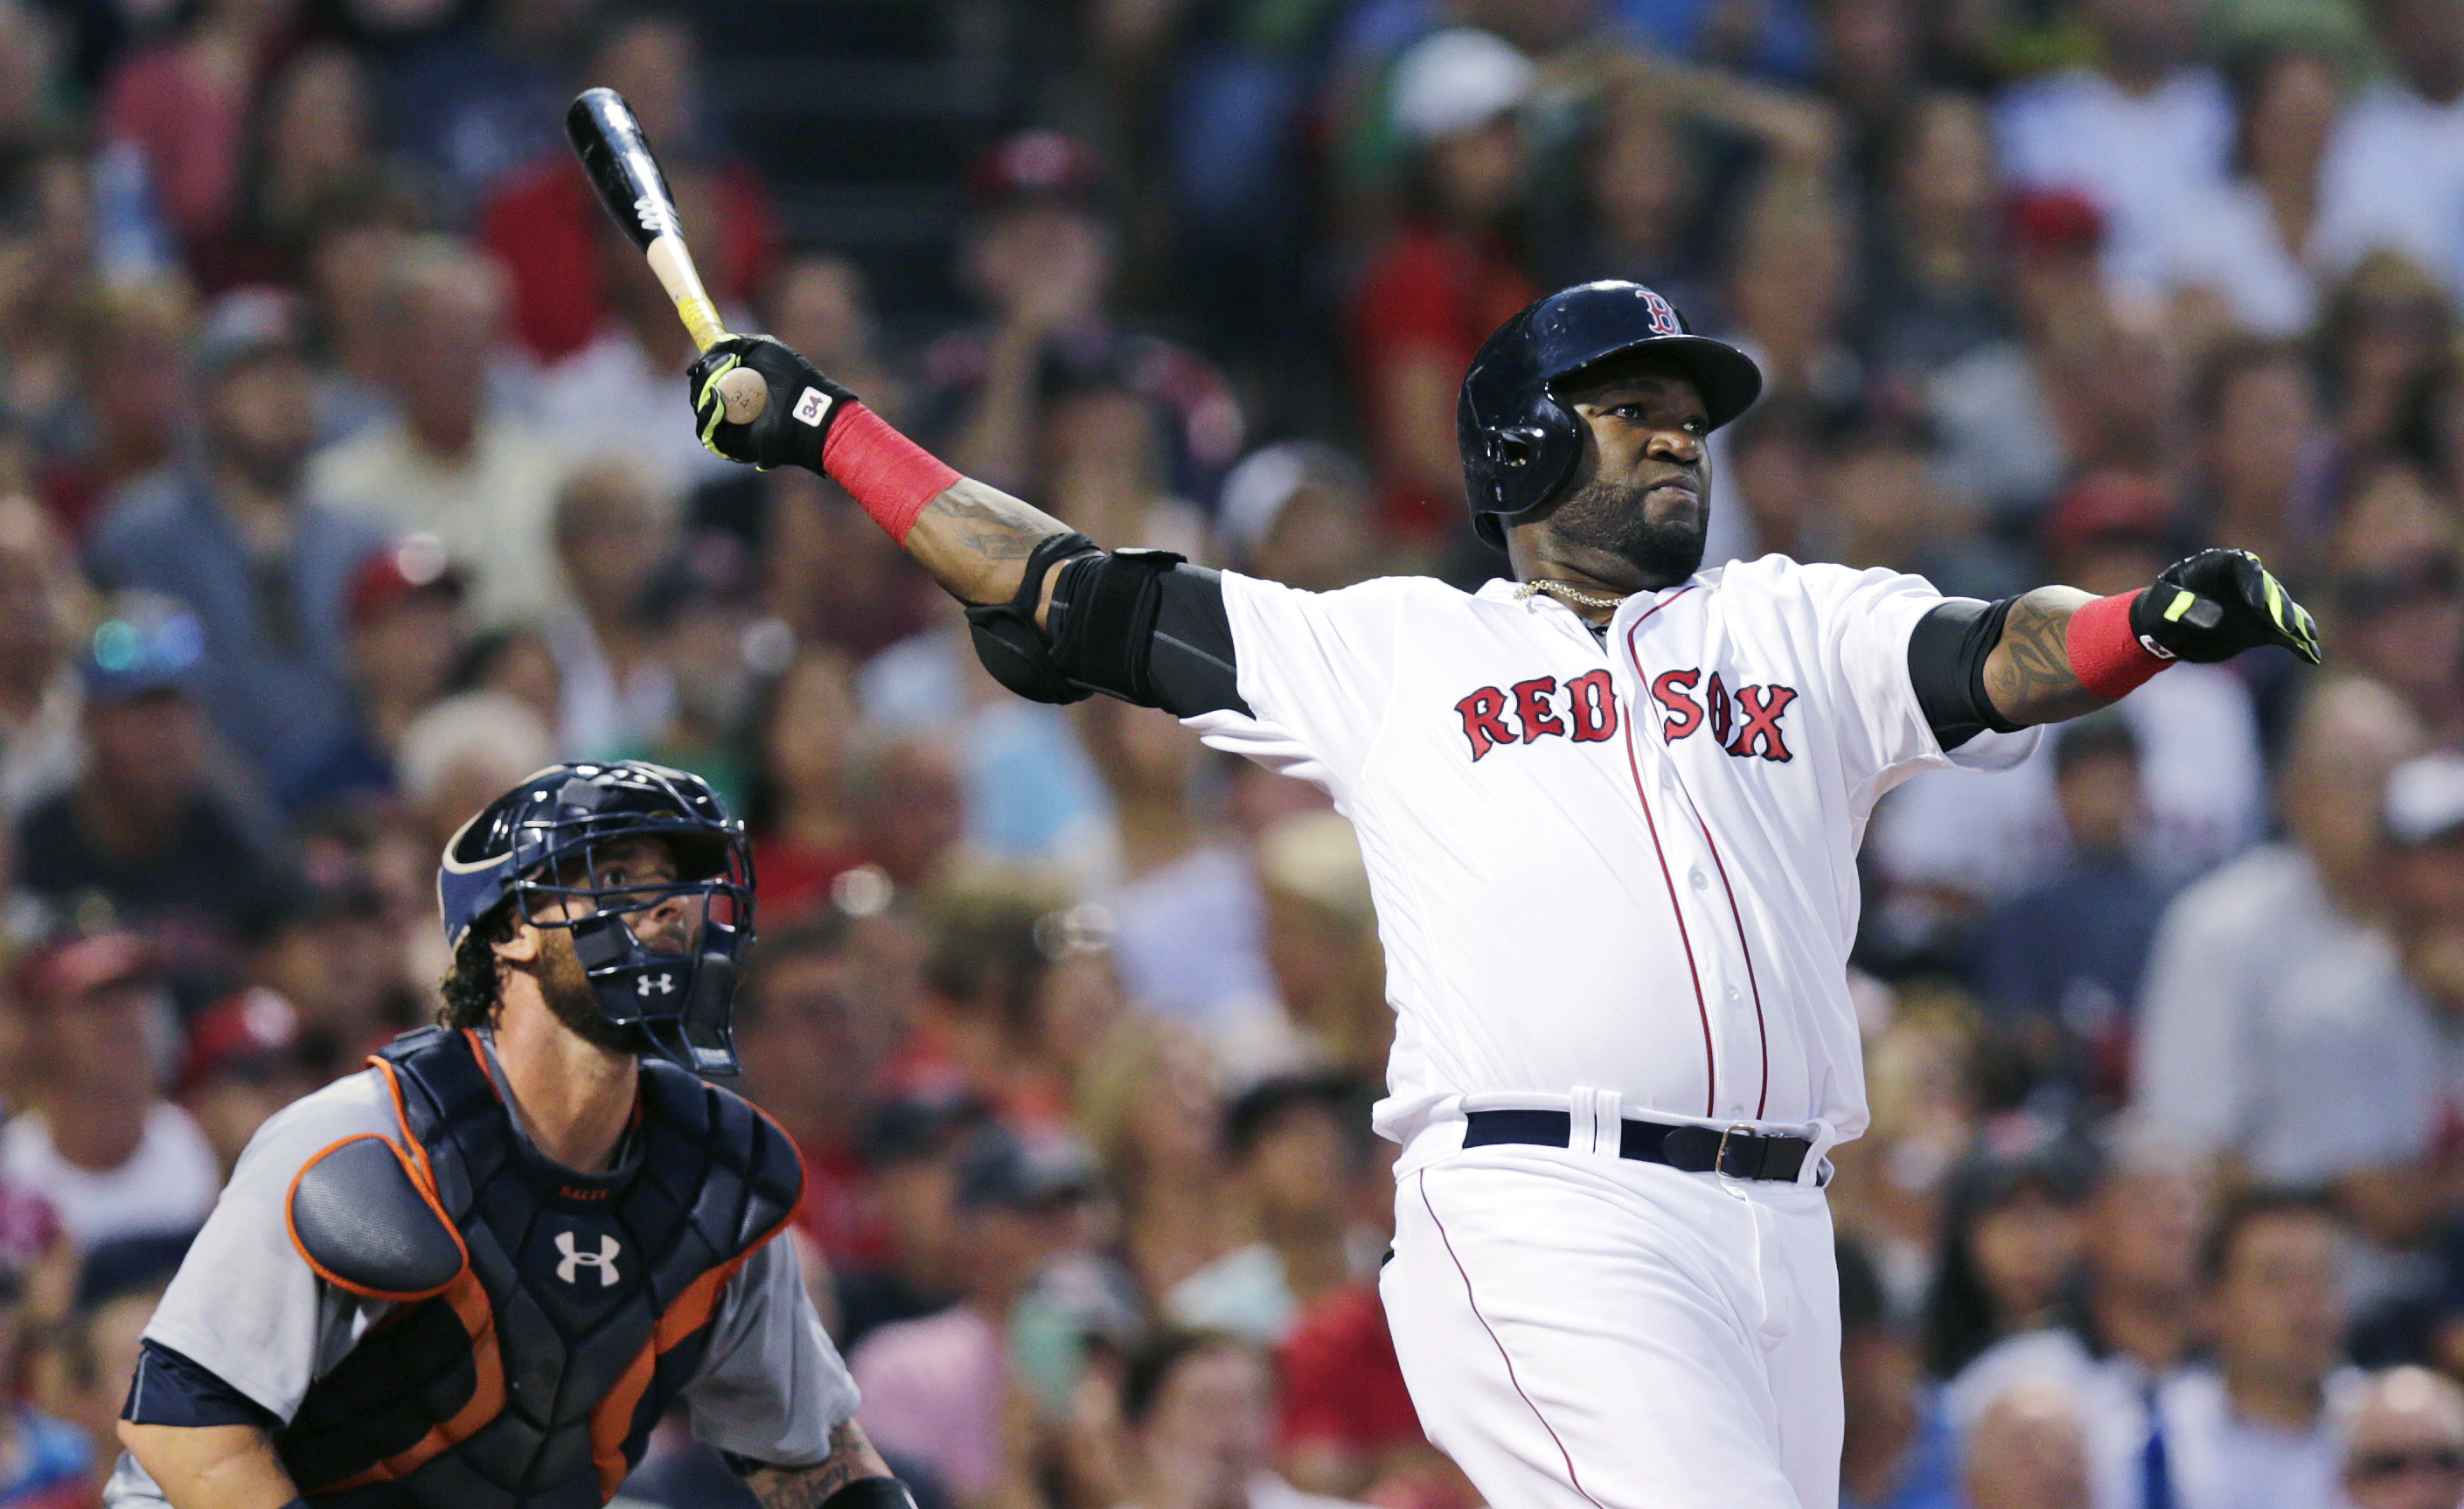 Red Sox legend David Ortiz claims to be 'victim of extortion